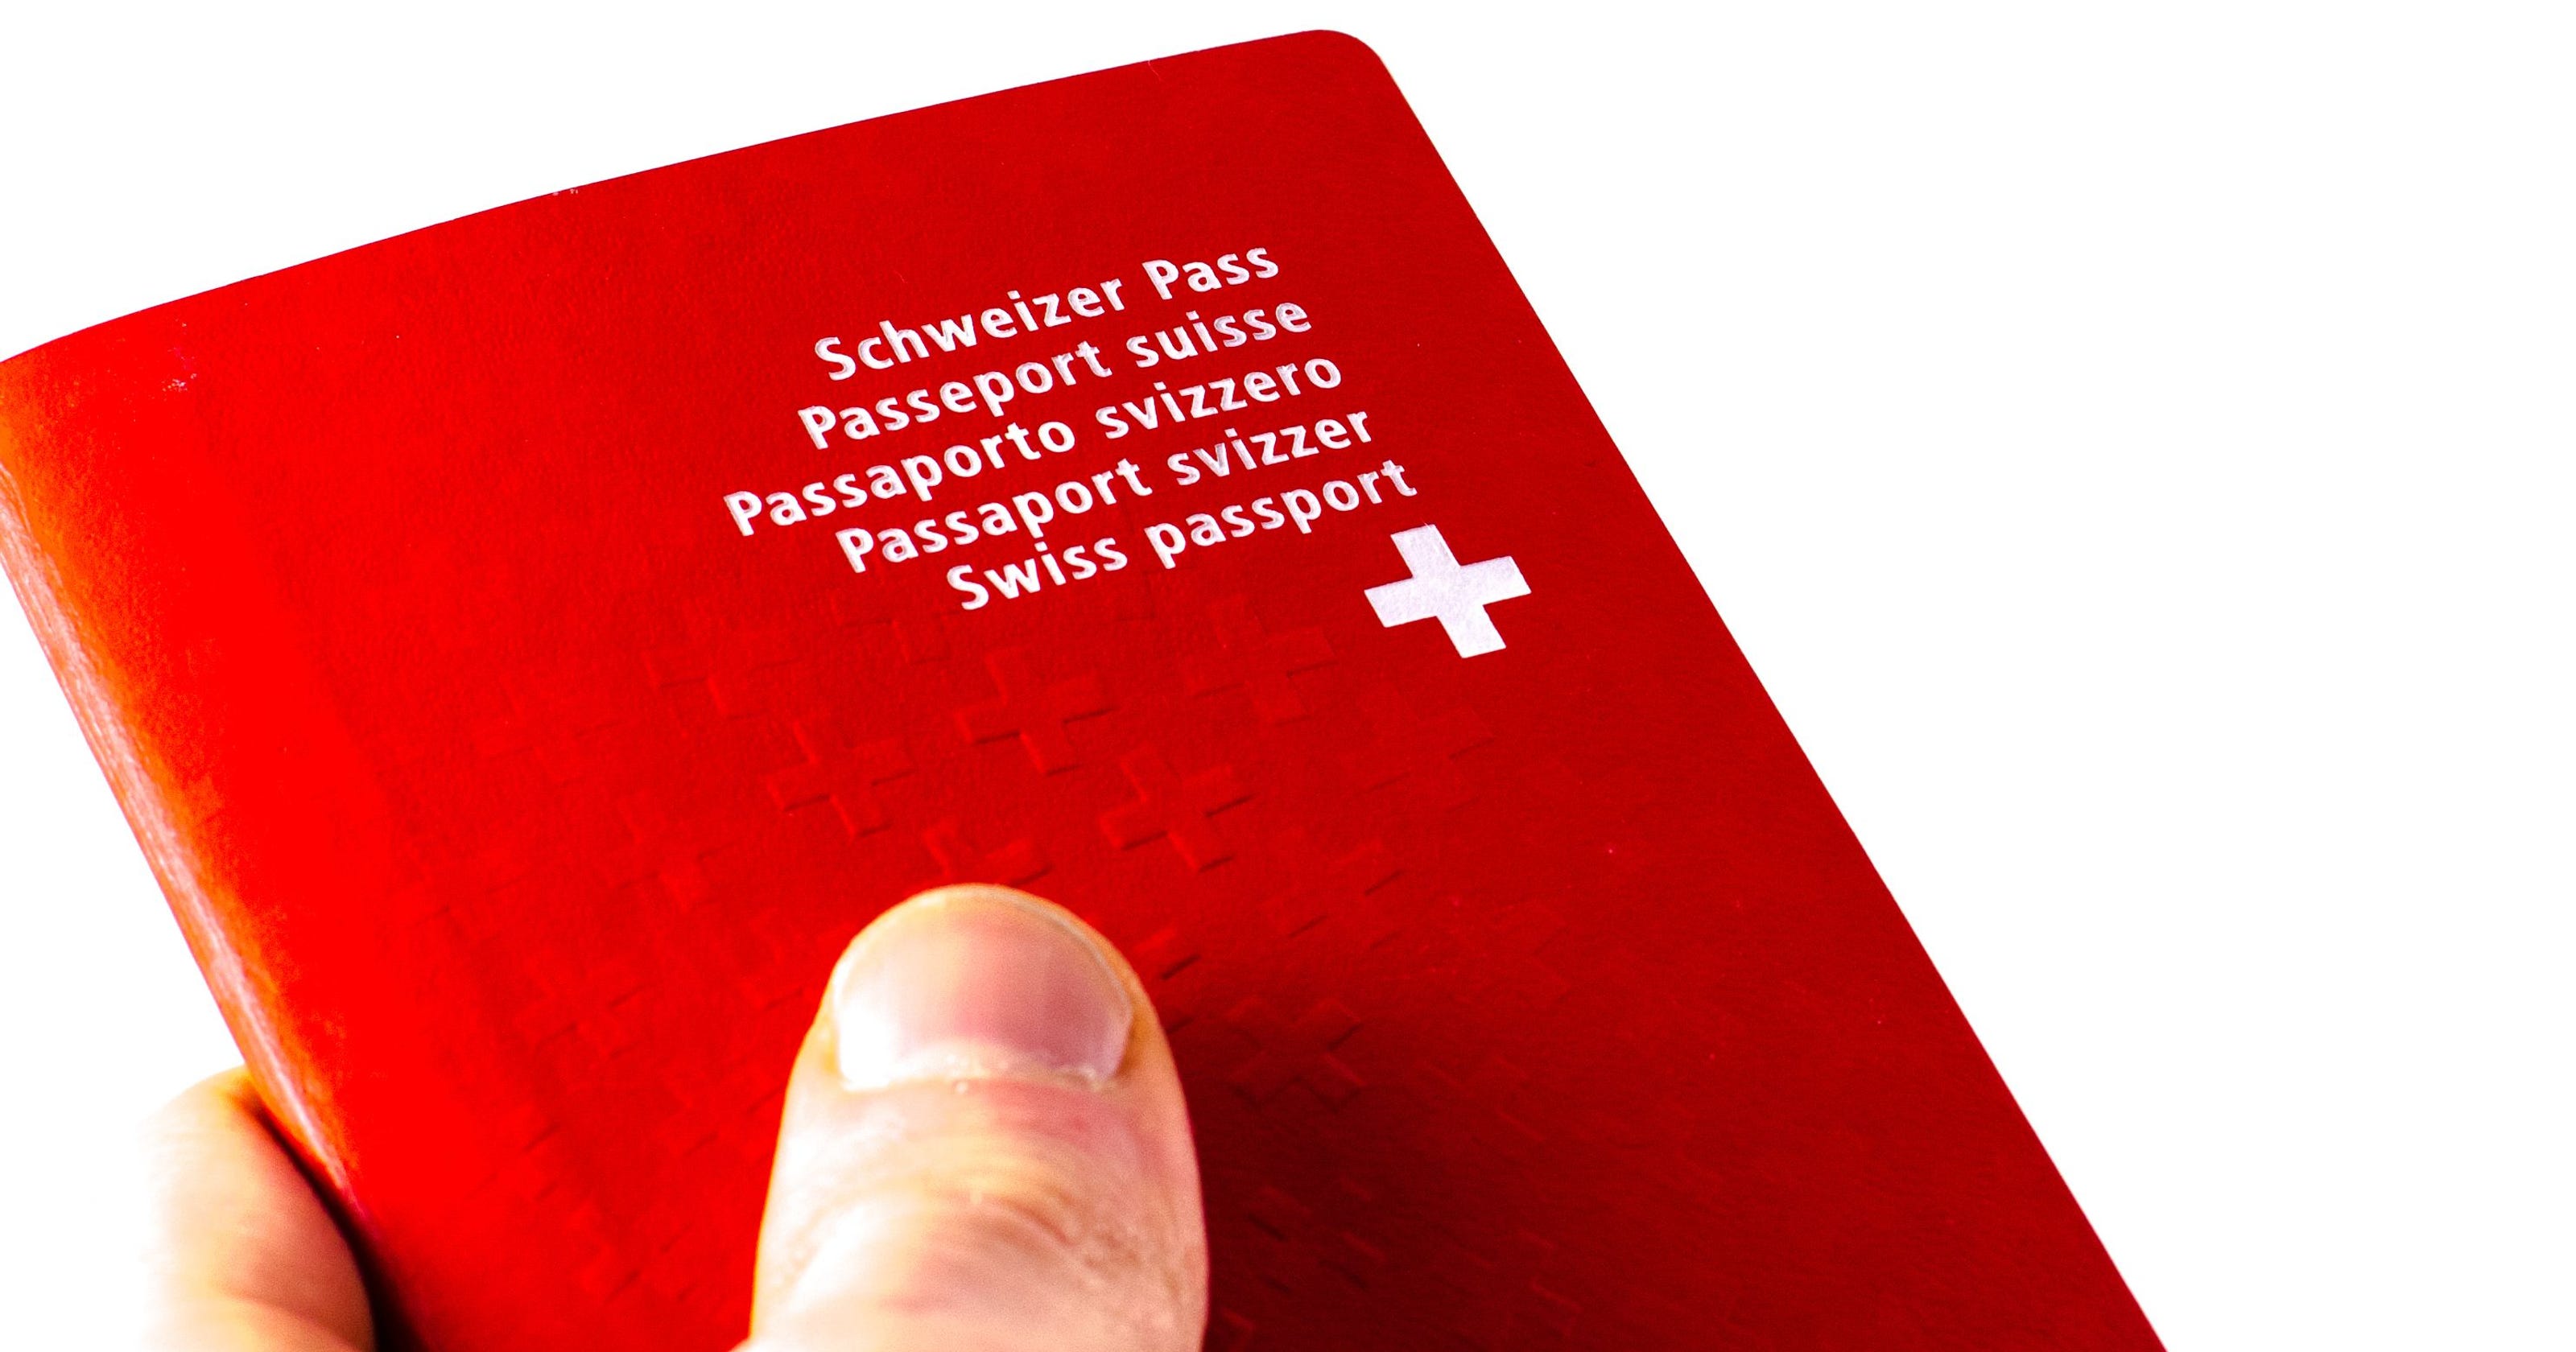 Vietnam Reissue E-visa For Swiss After March 15, 2022 | Vietnam Entry Requirements For Swiss 2022